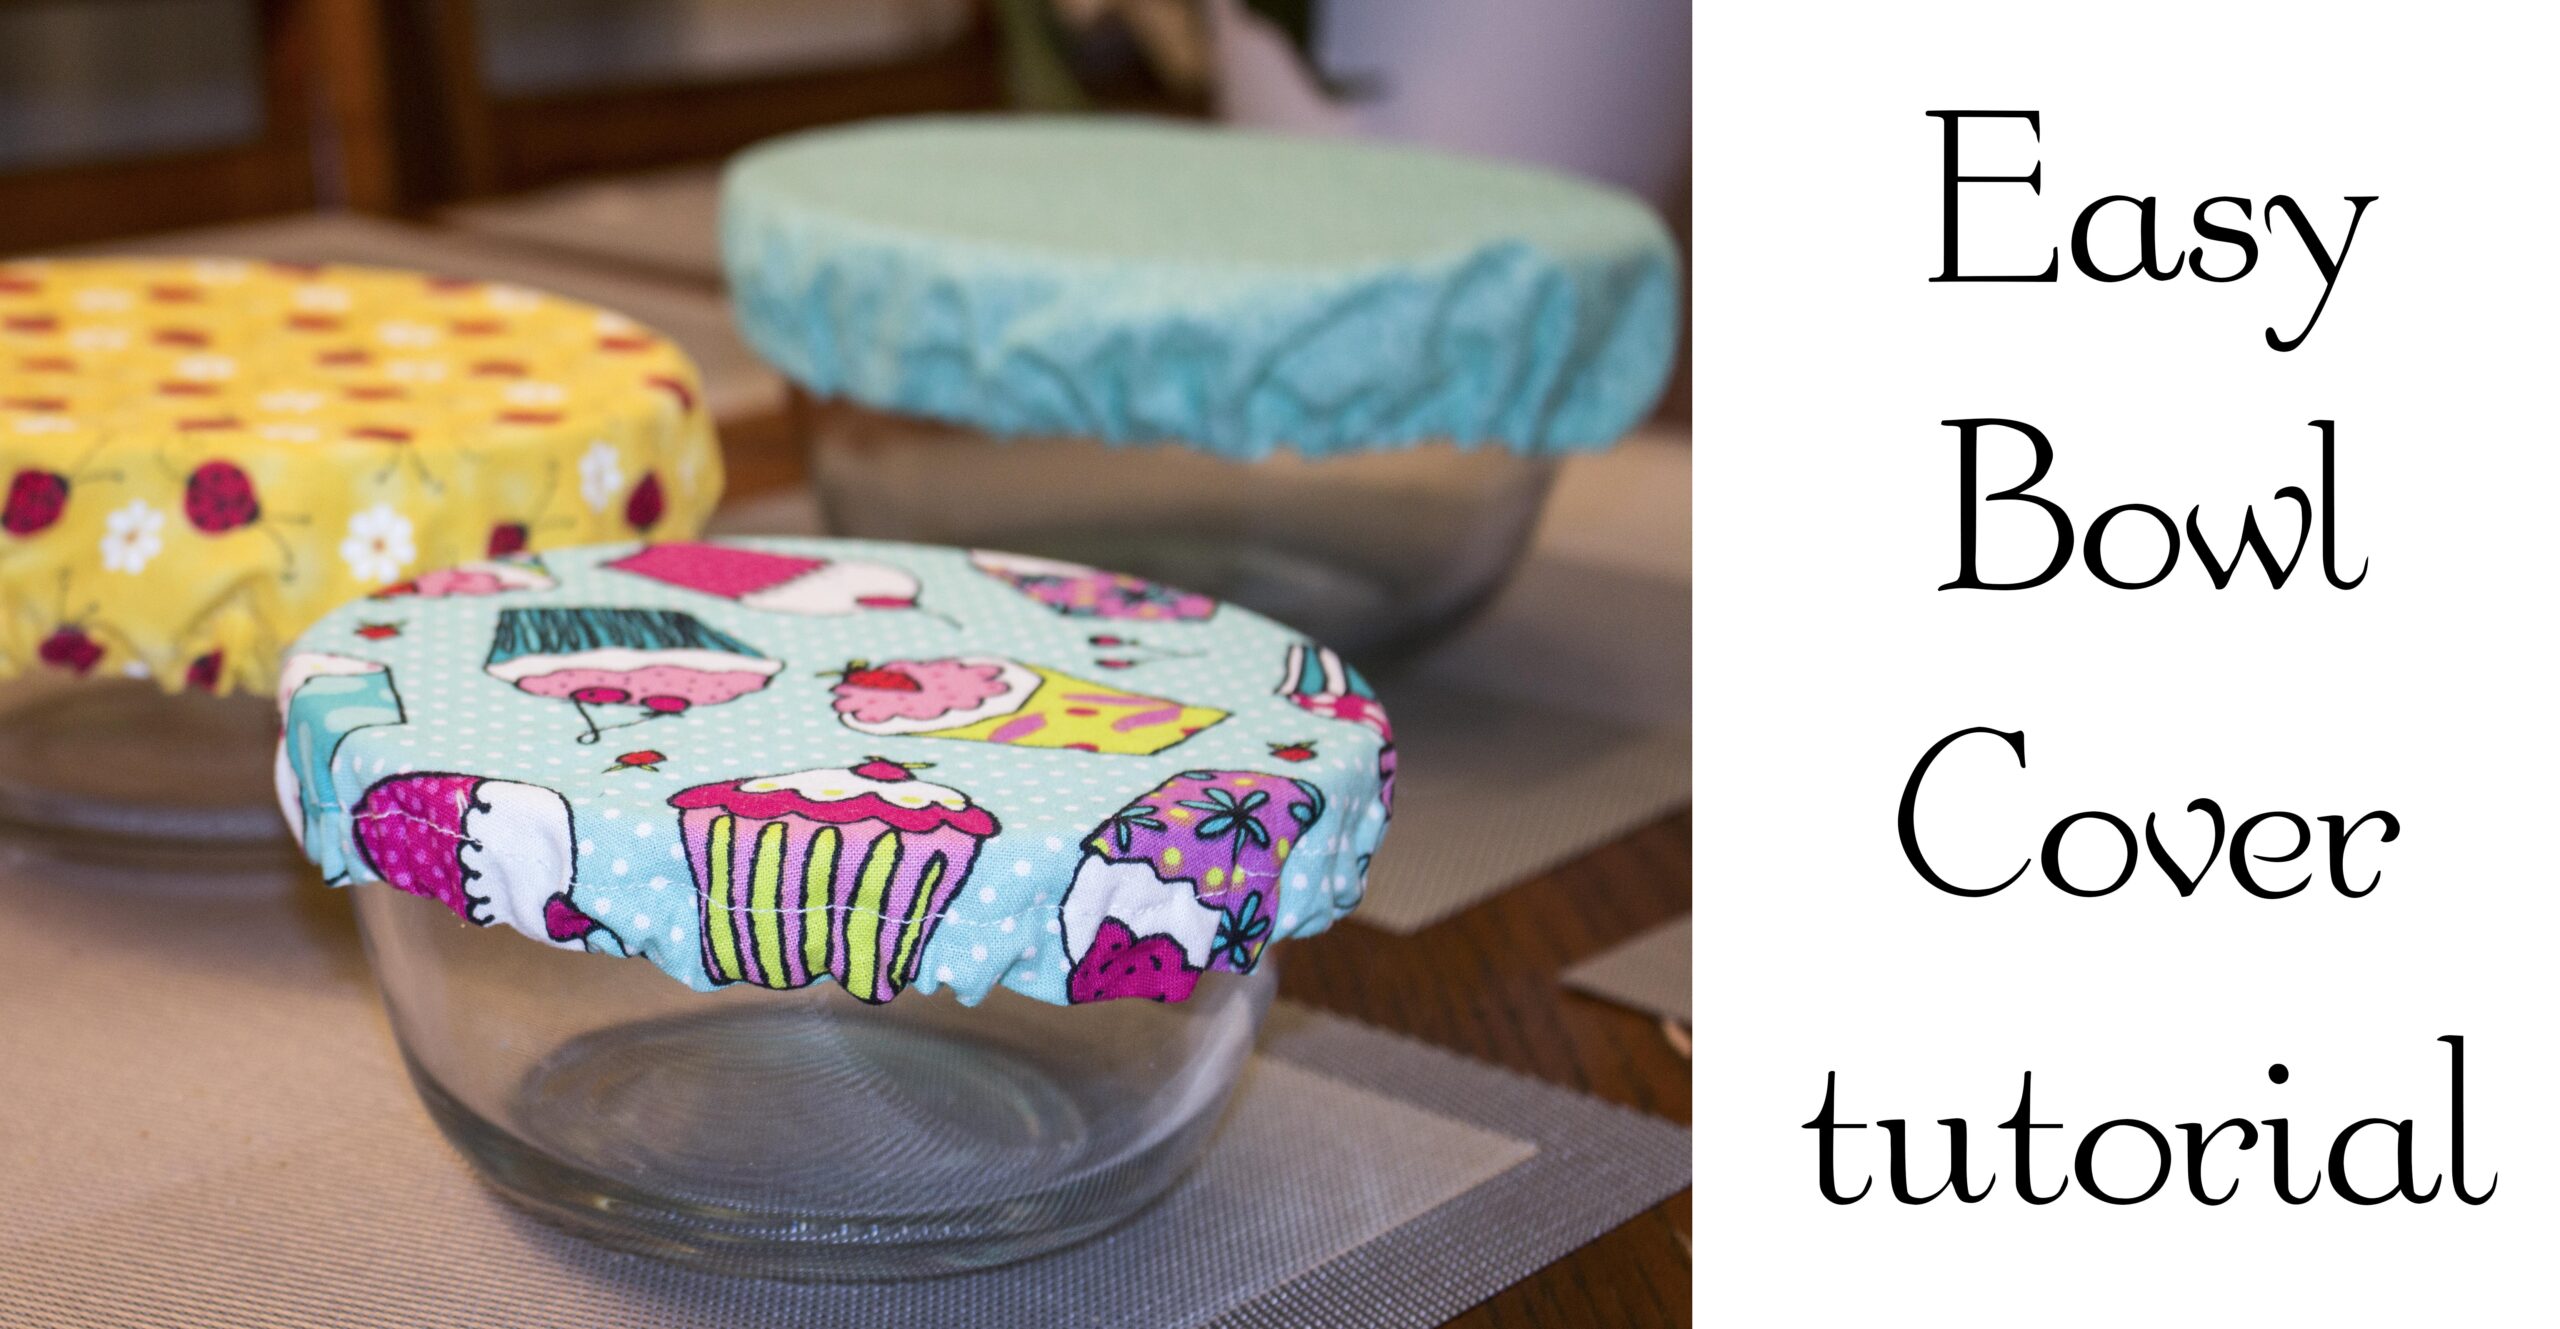 Easy fancy bowl covers!